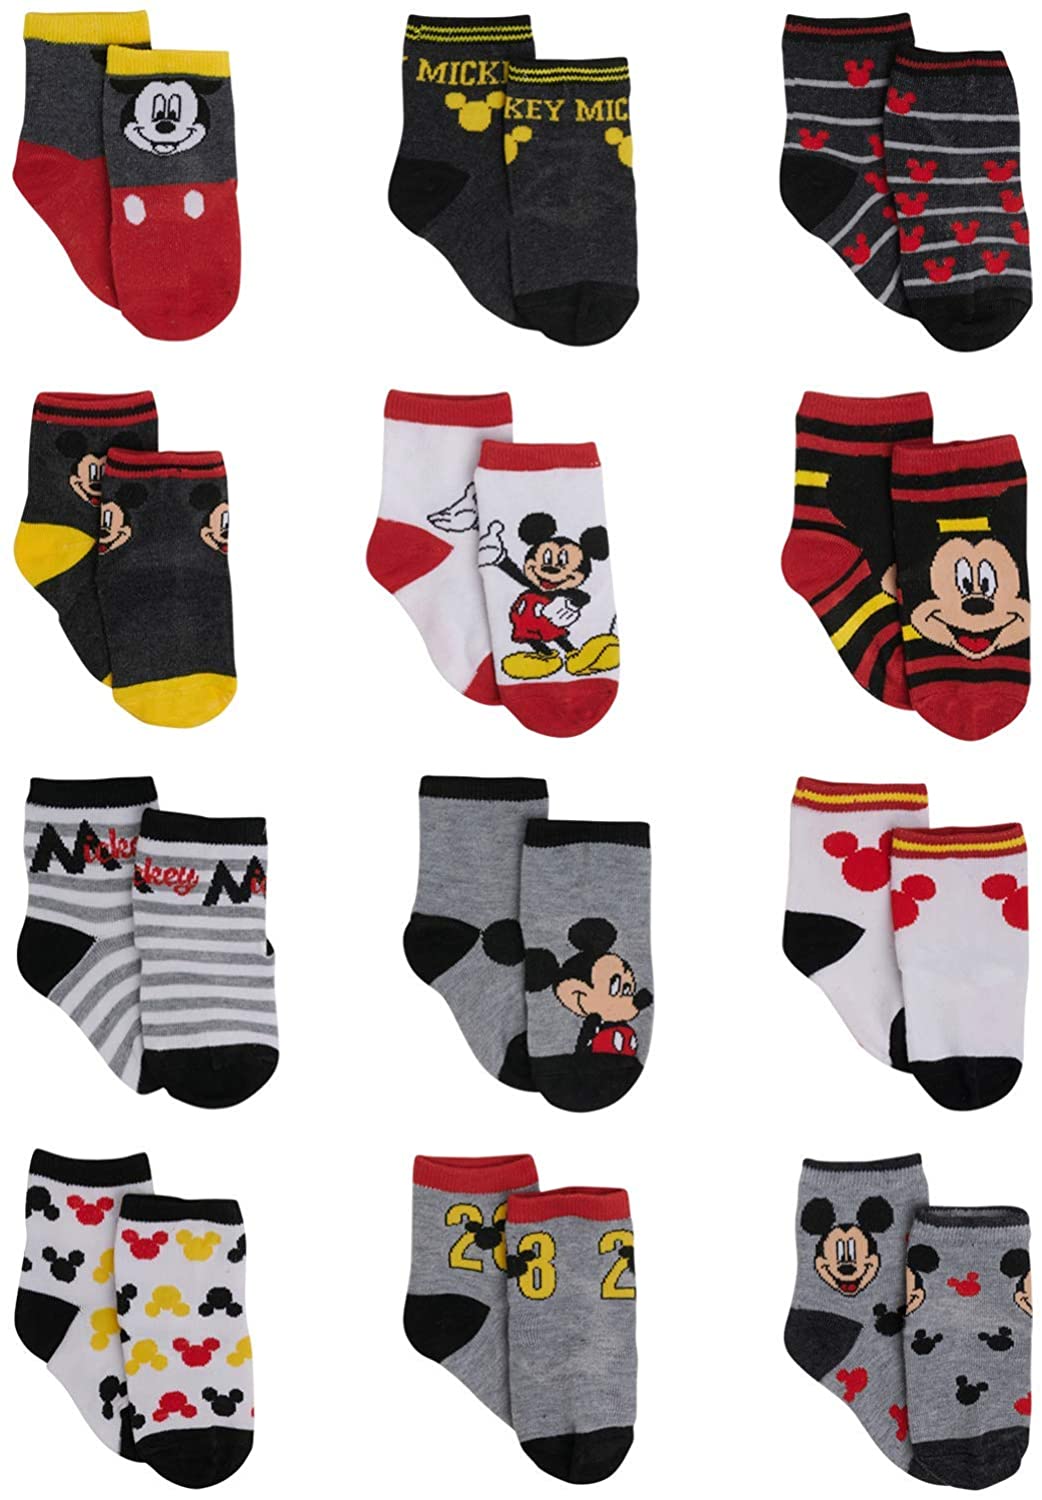 Disney Baby Boys Mickey Mouse Assorted Color Design 12 Pair Socks Set, Age 0-24 Months - image 1 of 5